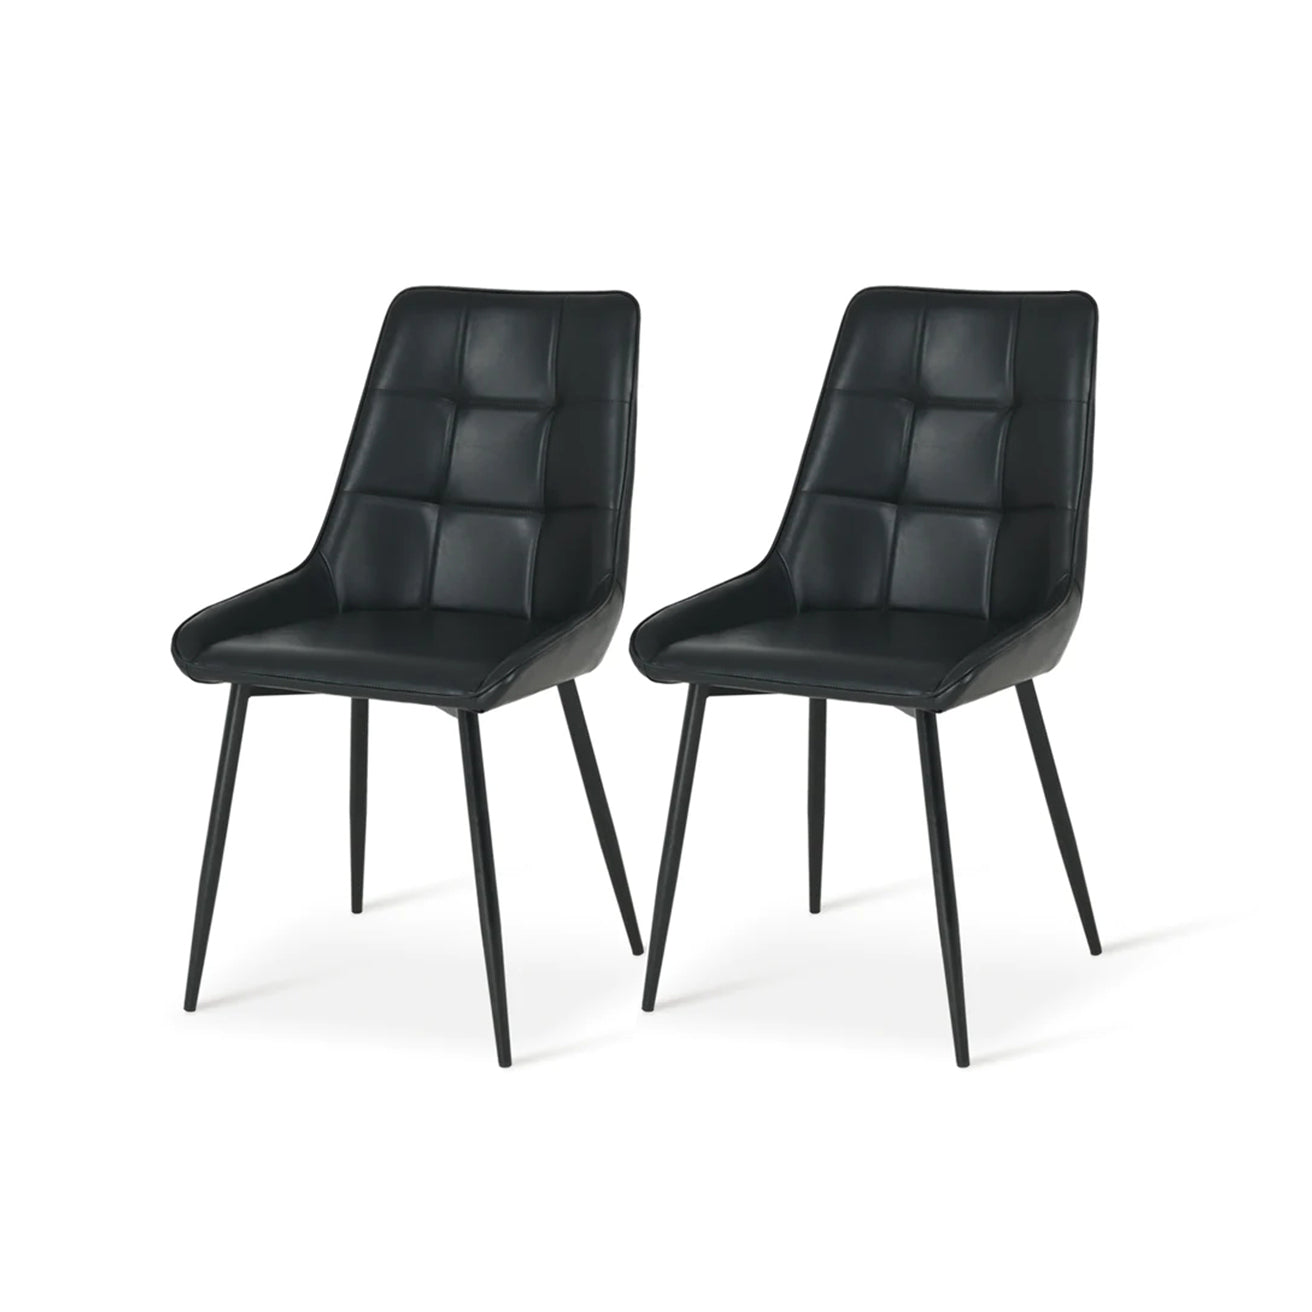 Zack Dining Chairs [Set of 2] [Pu Leather]